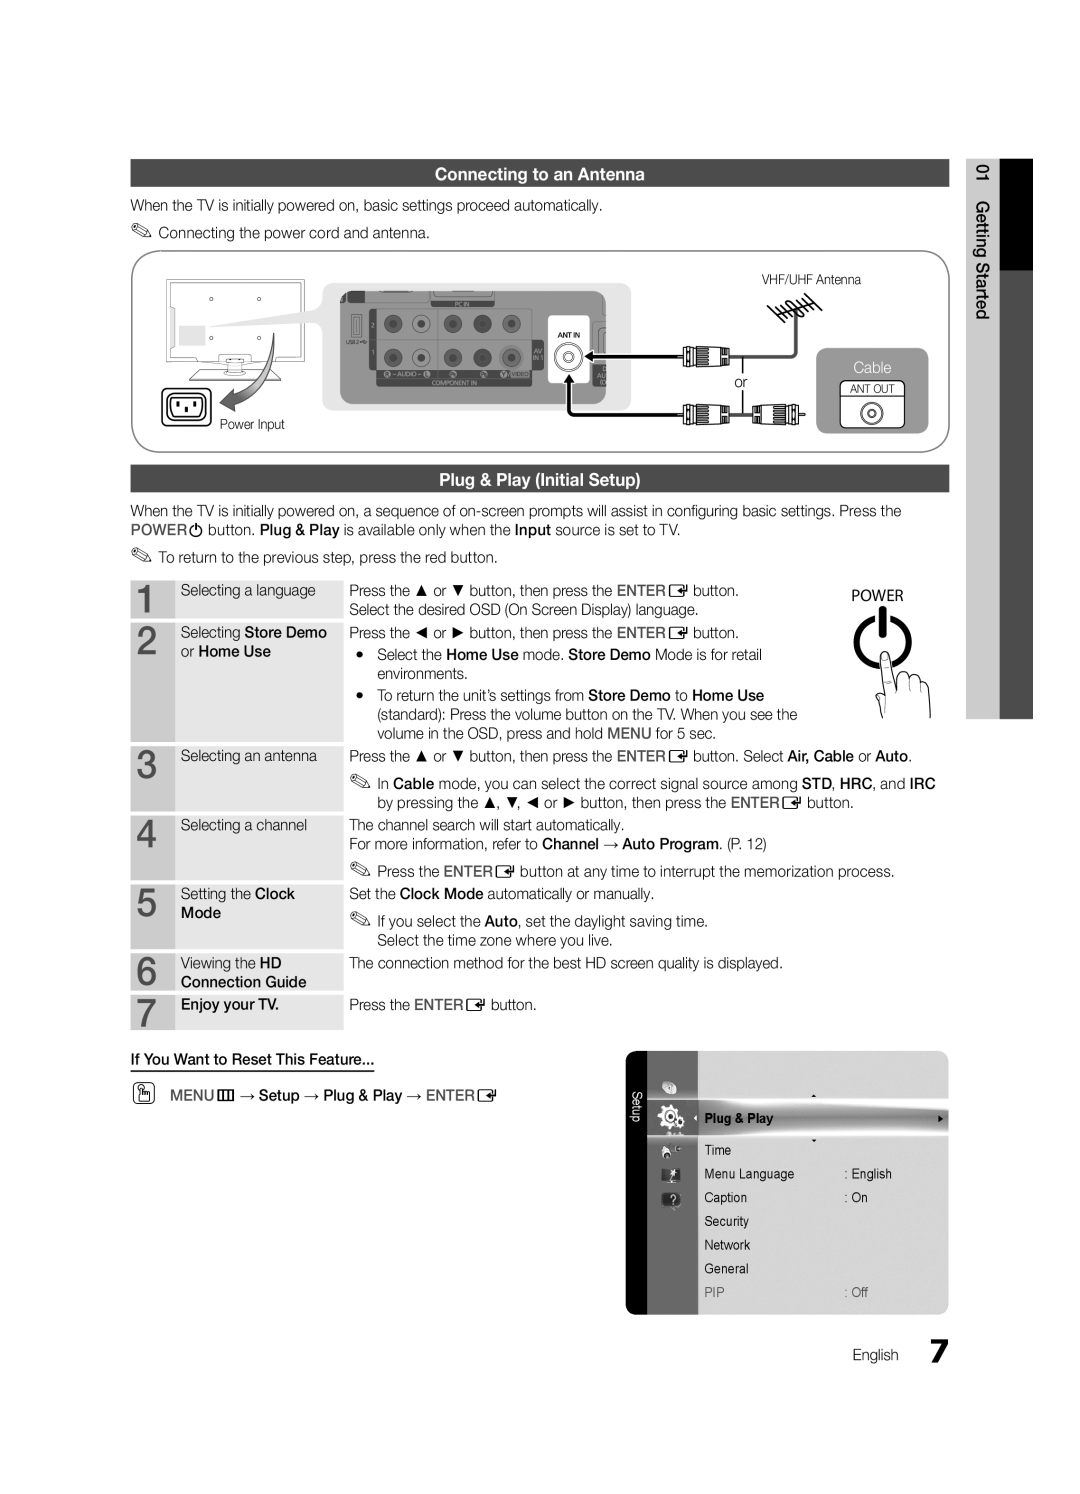 Samsung LN32C550 user manual Connecting to an Antenna, Plug & Play Initial Setup, Cable, Viewing the HD, Connection Guide 